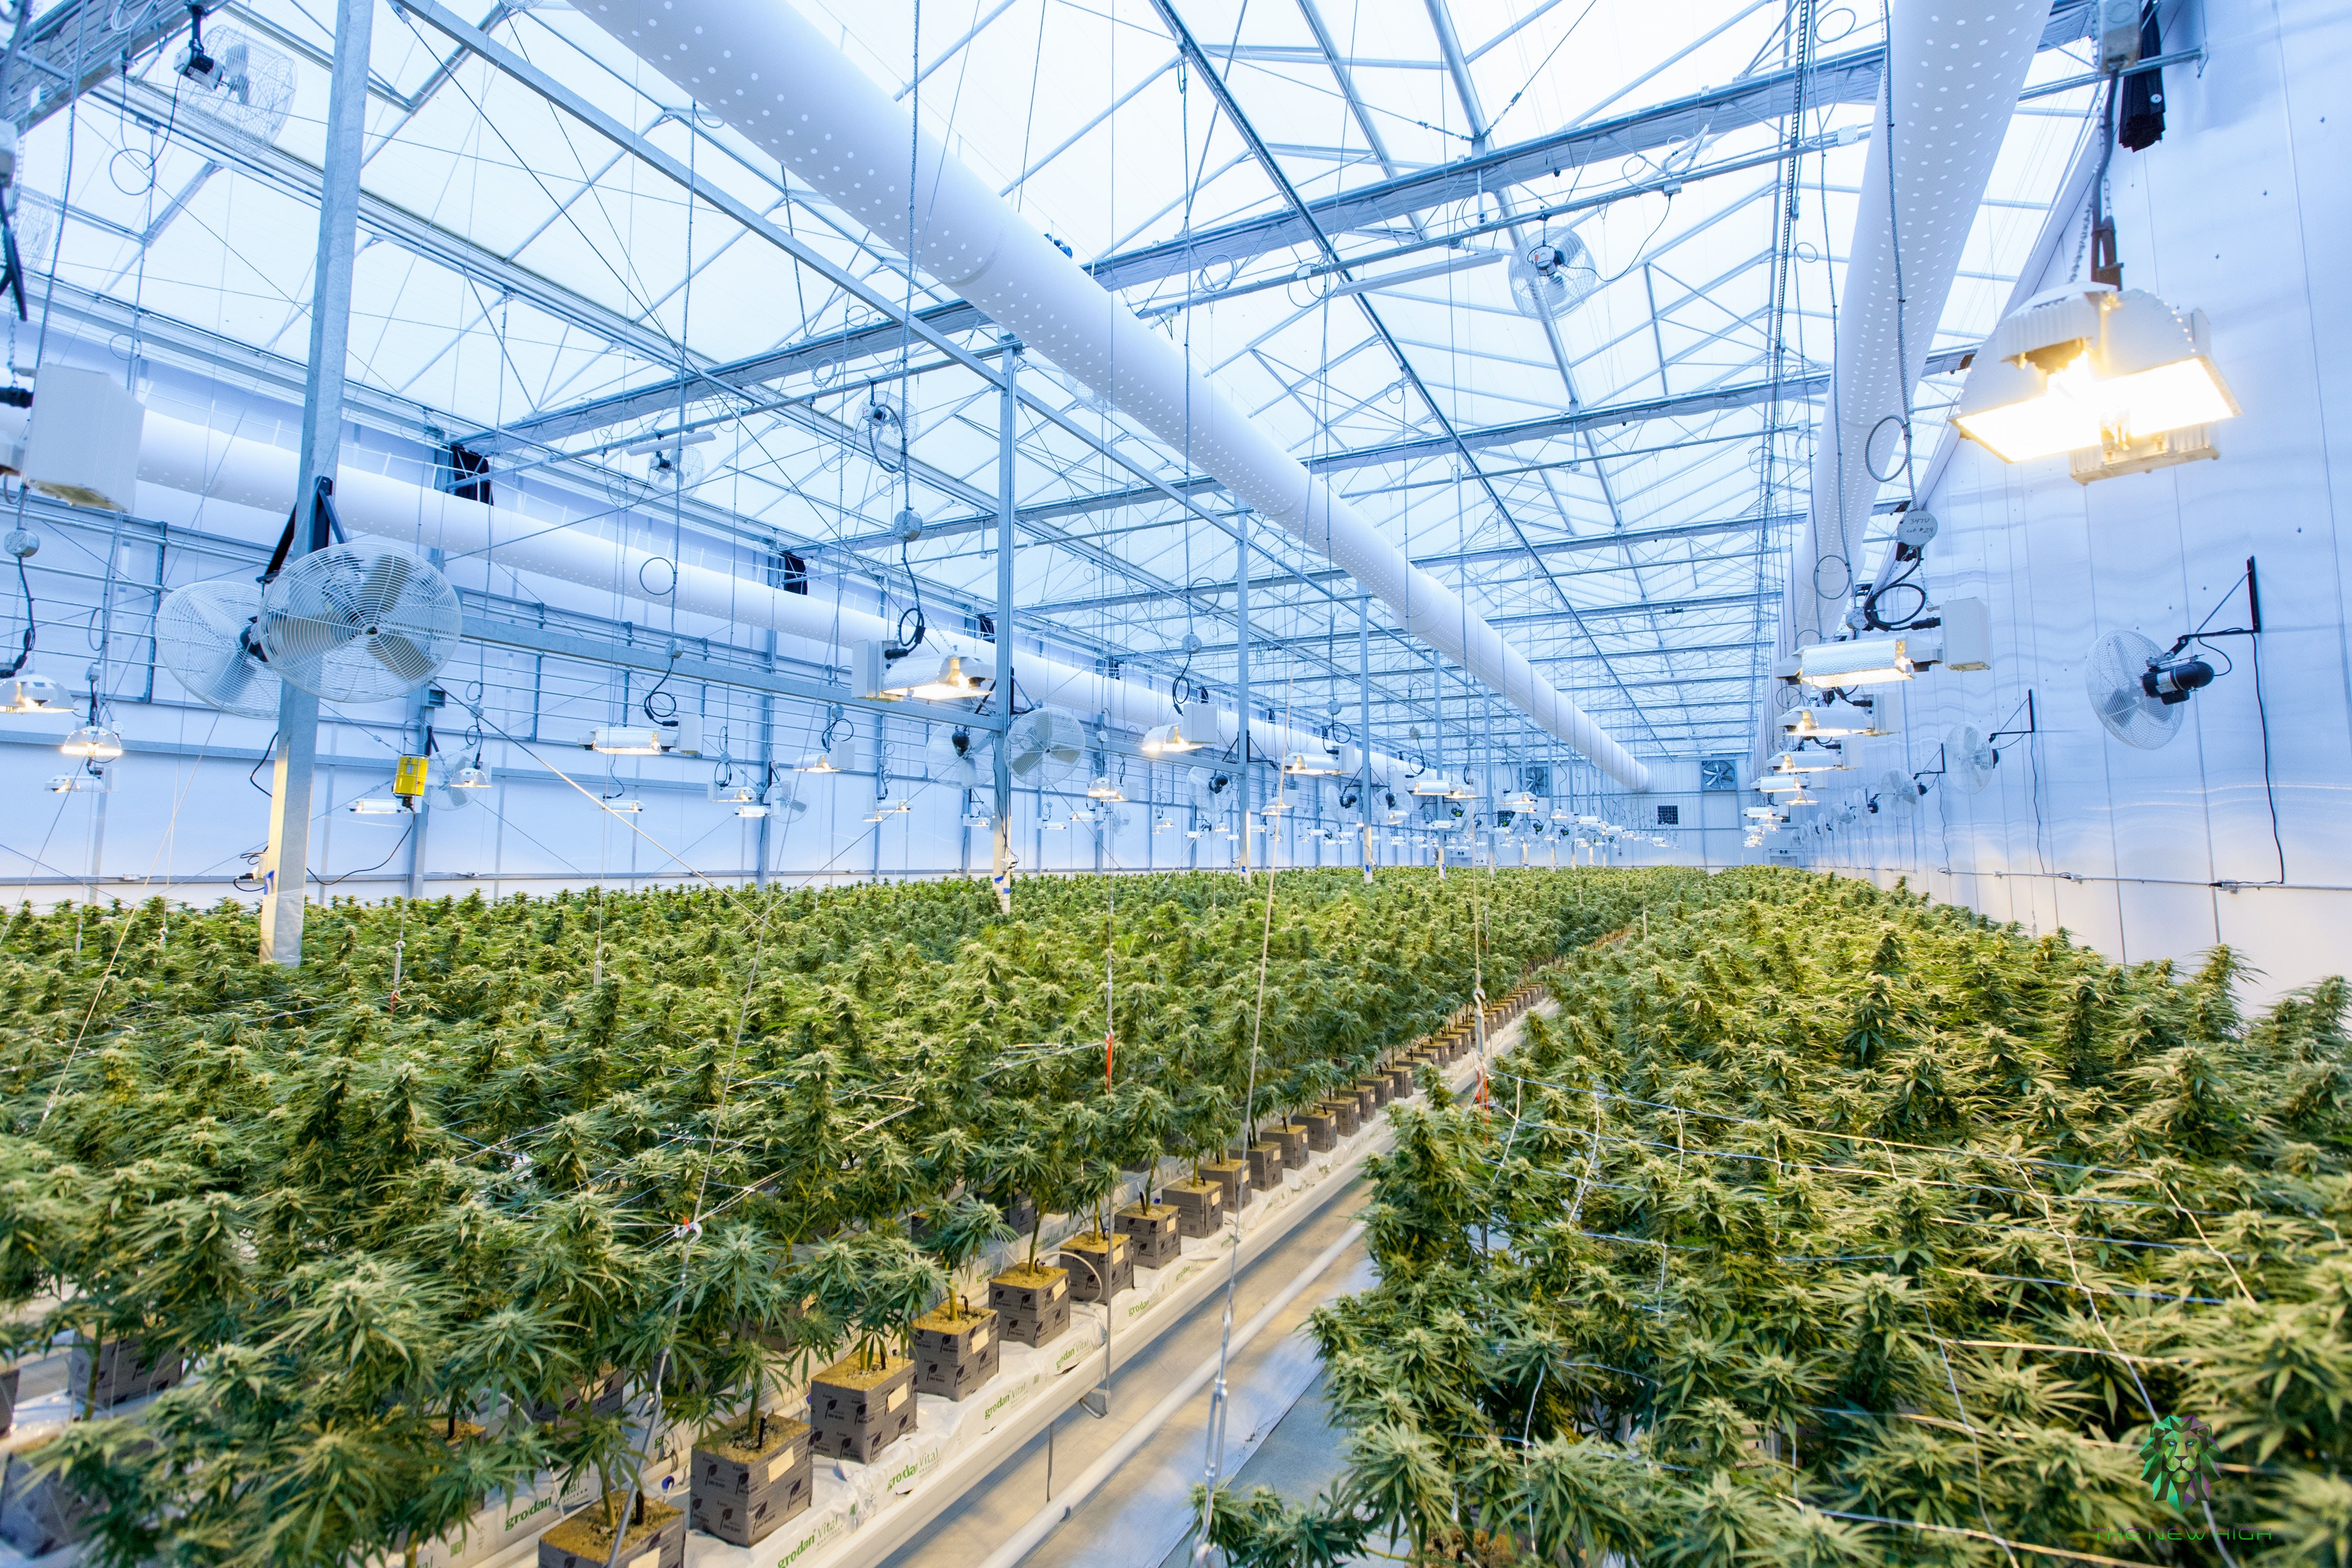 ScottsMiracle-Gro, TerrAscend, Canopy Growth & Other Large Cannabis Stocks Announce Earnings Release Dates